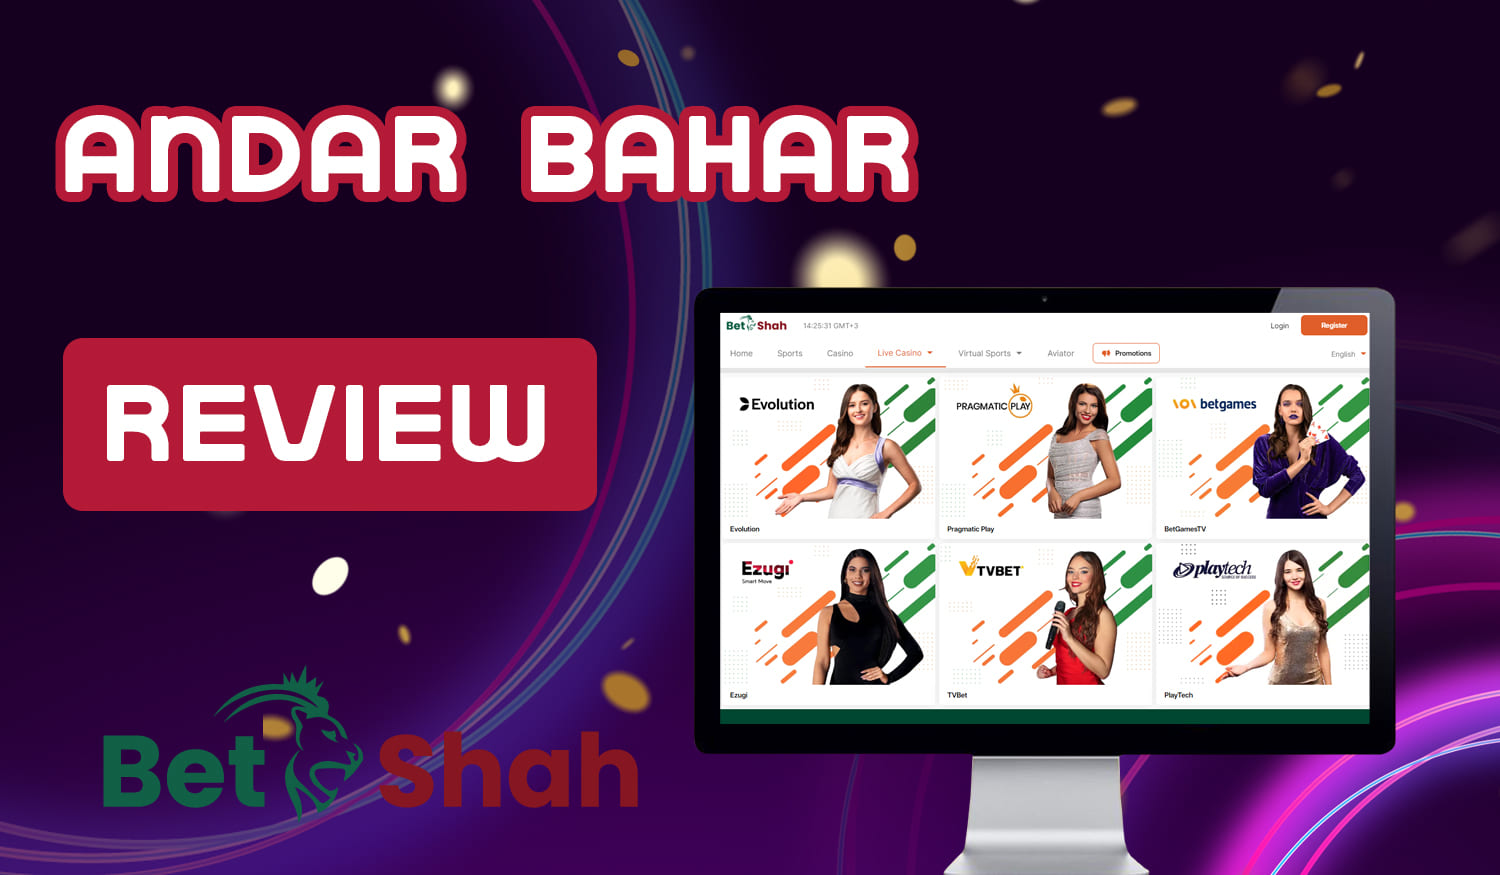 Rules and principles of Andar Bahar game on BetShah online casino site